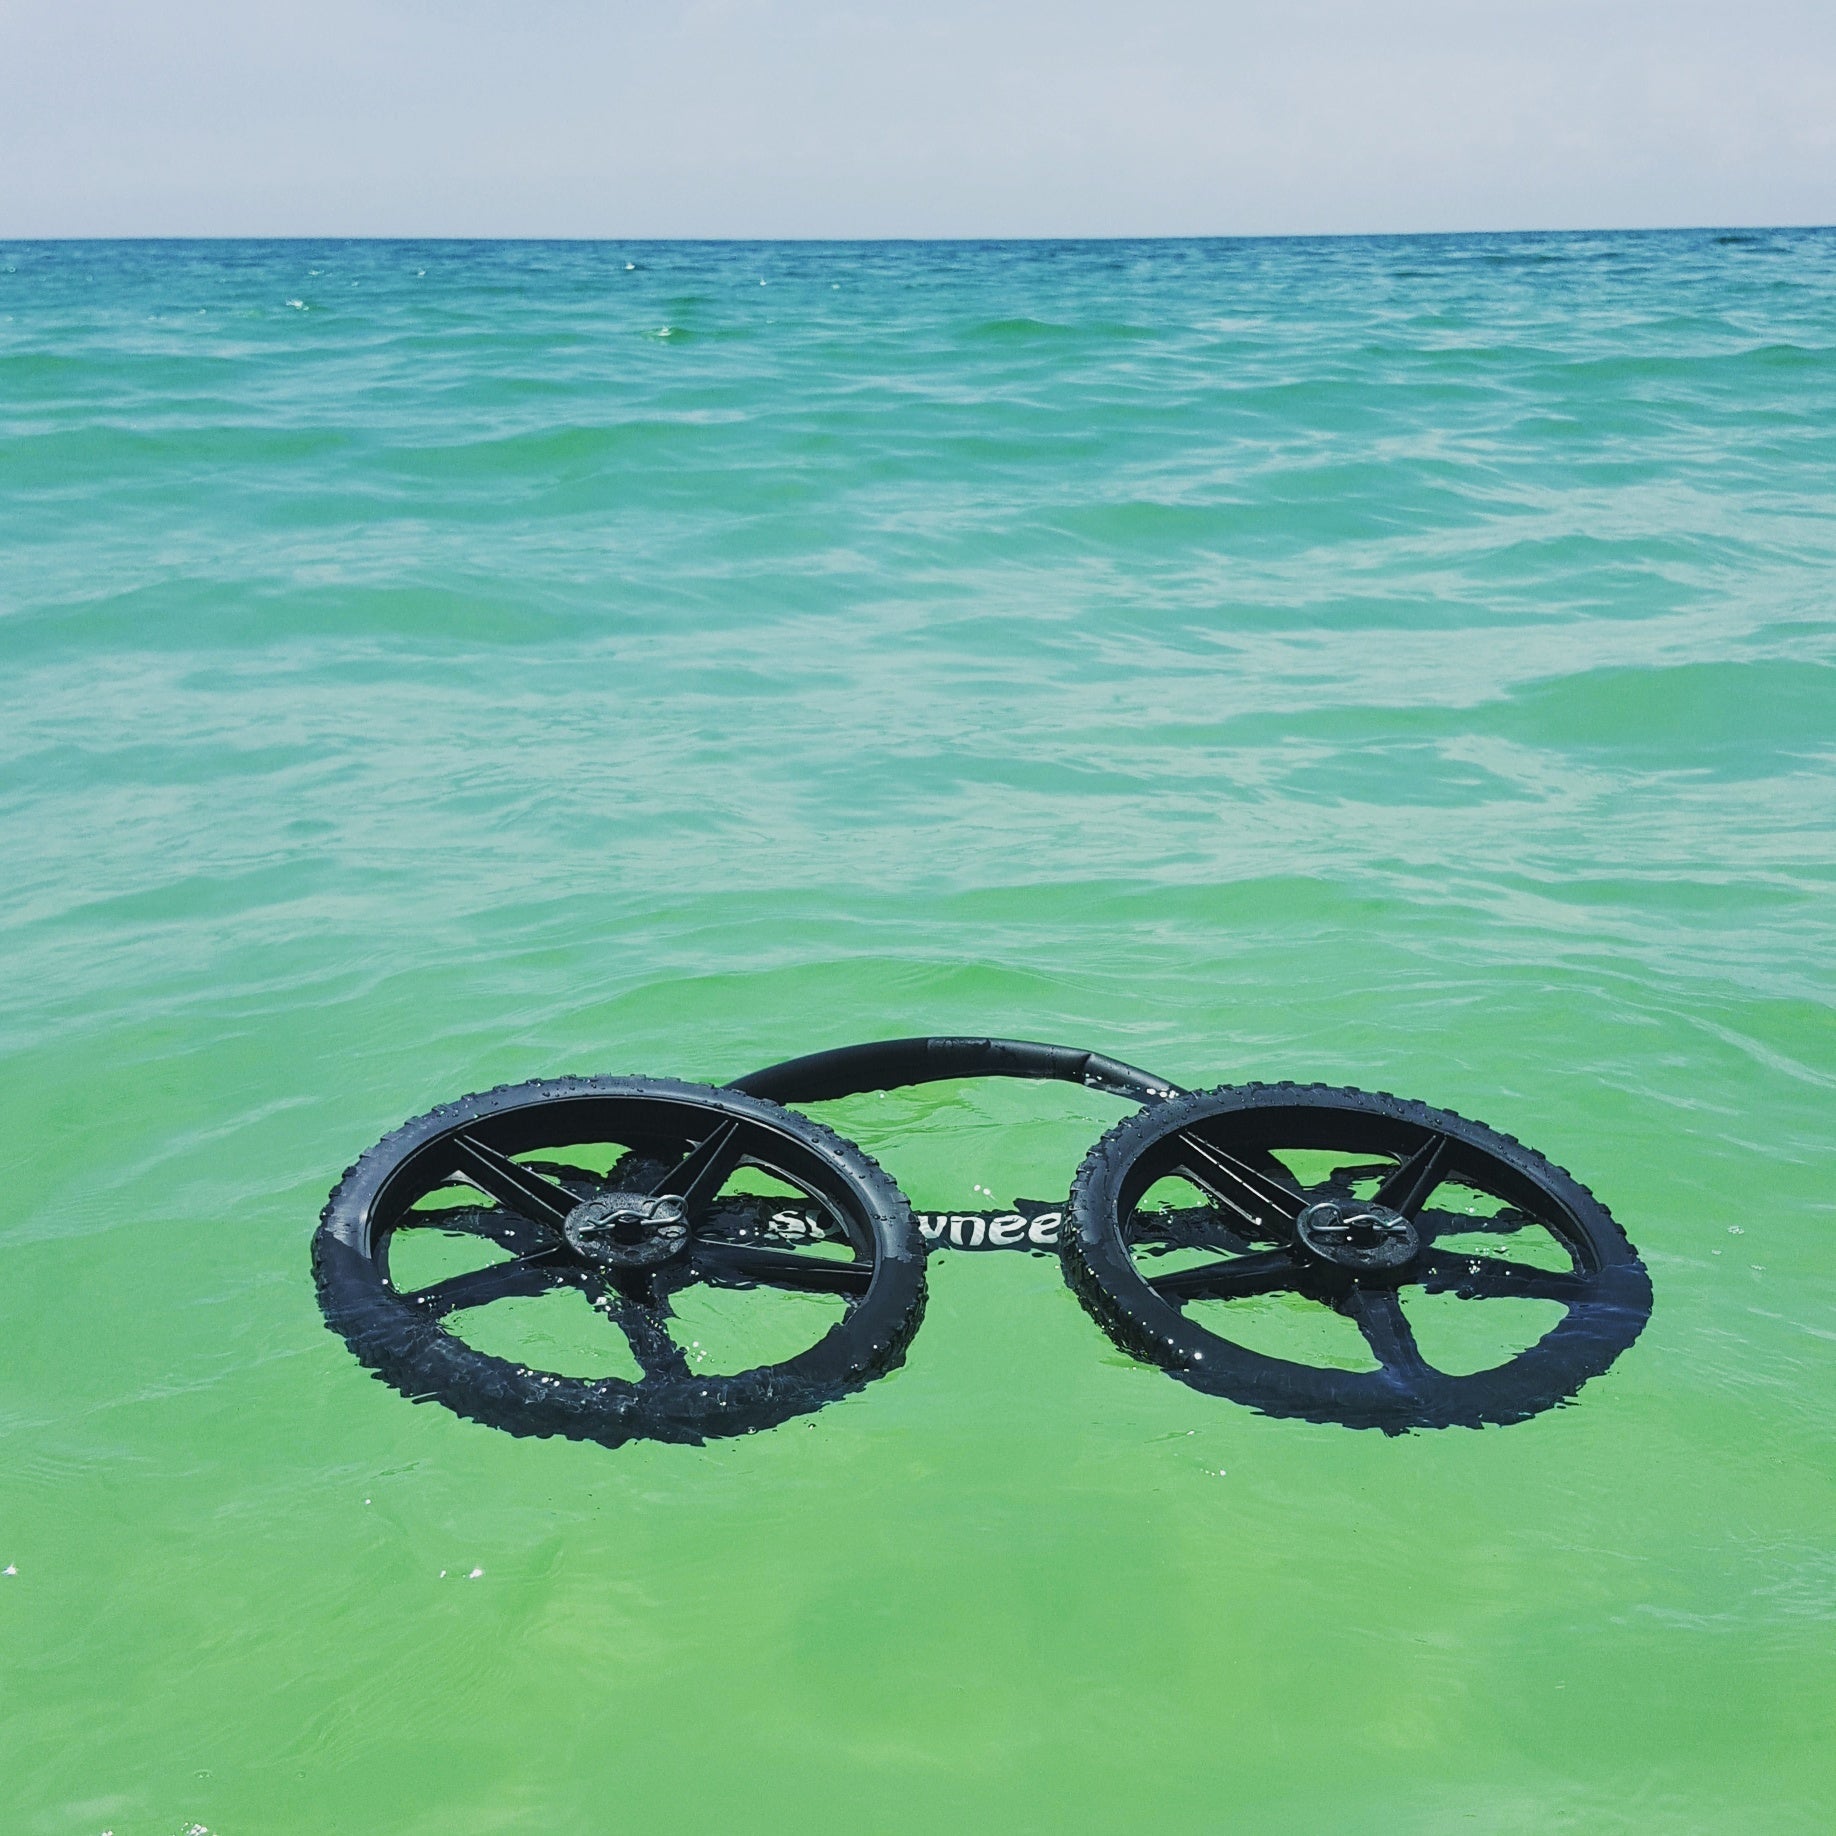 SUP Wheels foat in water no rush or UV issues.